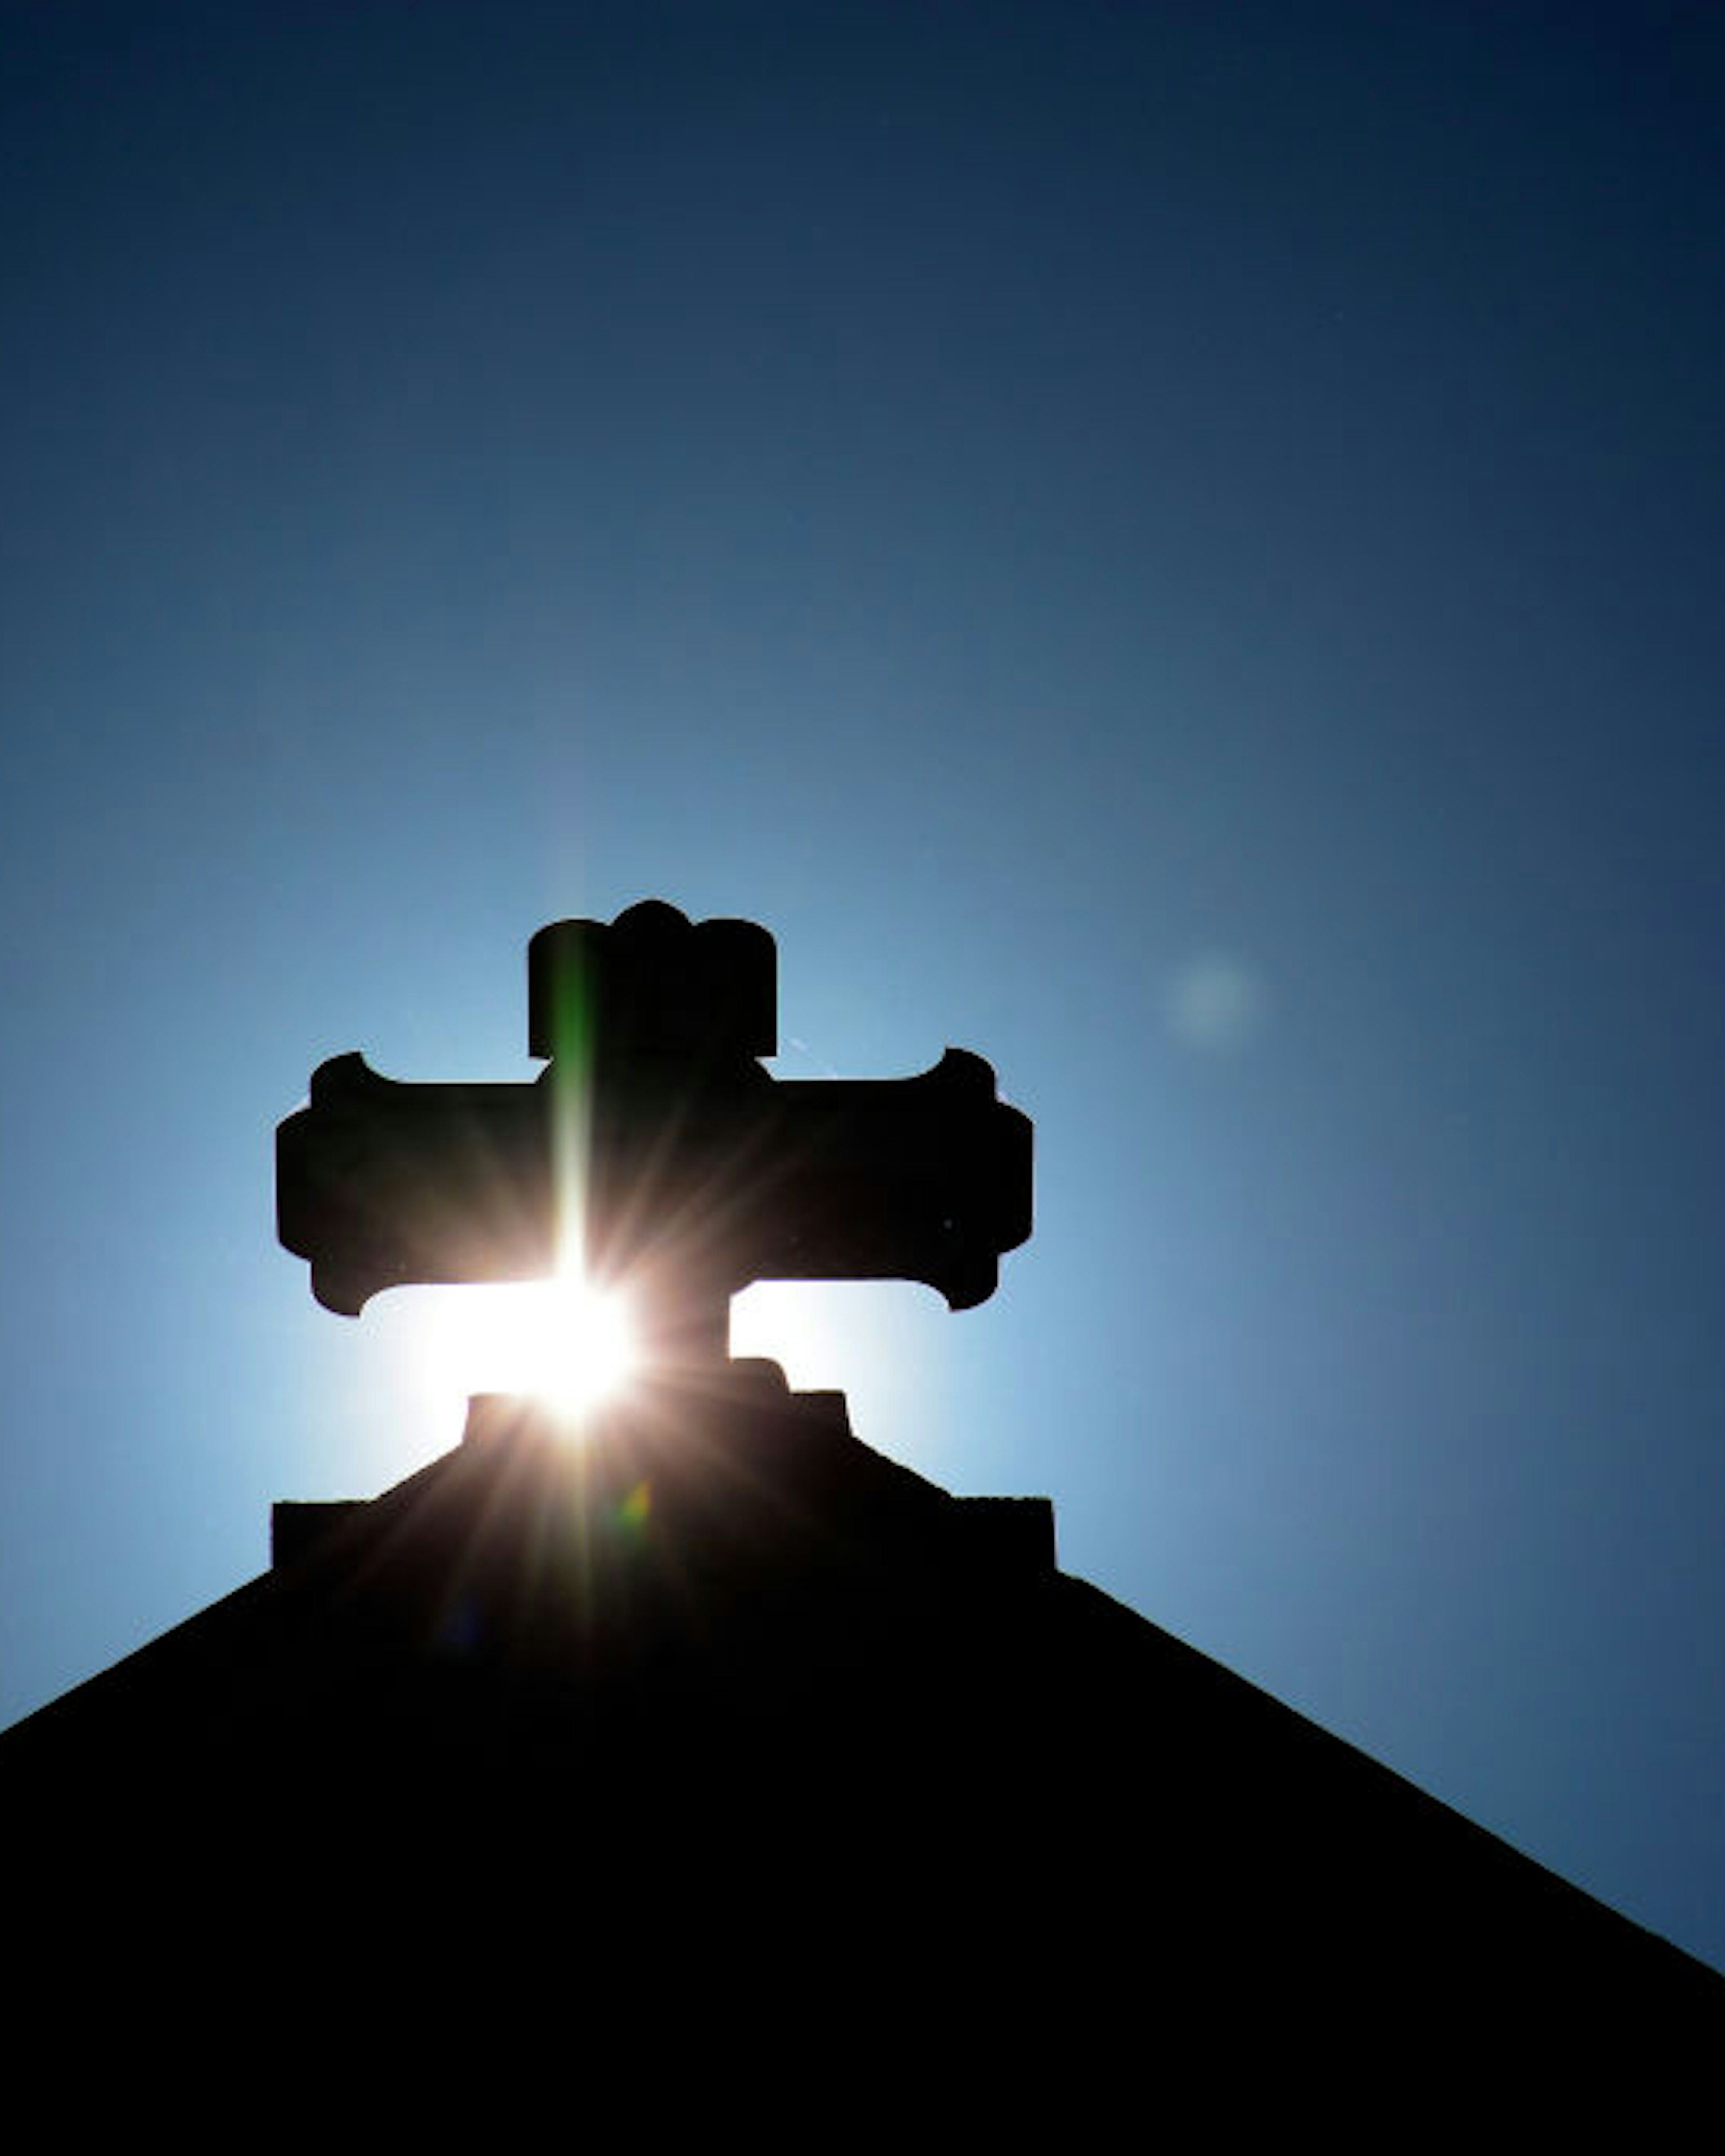 SANTA FE, NM - JULY 29, 2017: The morning sun rises behind a stone cross atop The Cathedral Basilica of St. Francis of Assisi, commonly known as Saint Francis Cathedral, in Santa Fe, New Mexico. Built between 1869 and 1886, the Roman Catholic Church is the mother church of the Archdiocese of Santa Fe. (Photo by Robert Alexander/Getty Images)